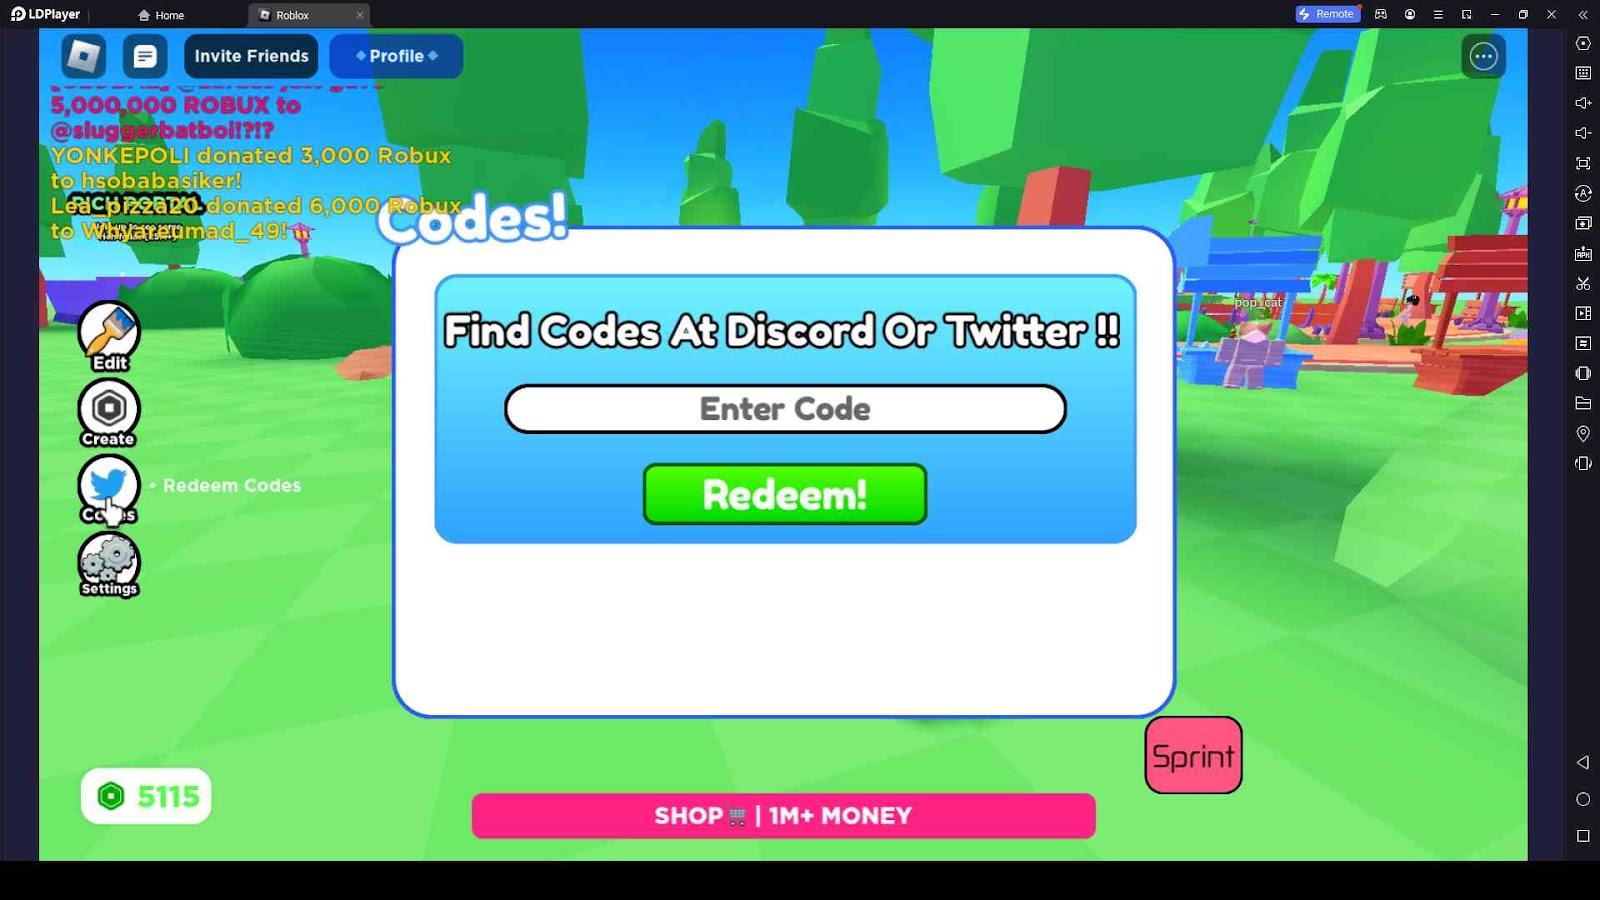 Roblox Earn and Donate Codes Guide: Sharing, Caring, and Elevating